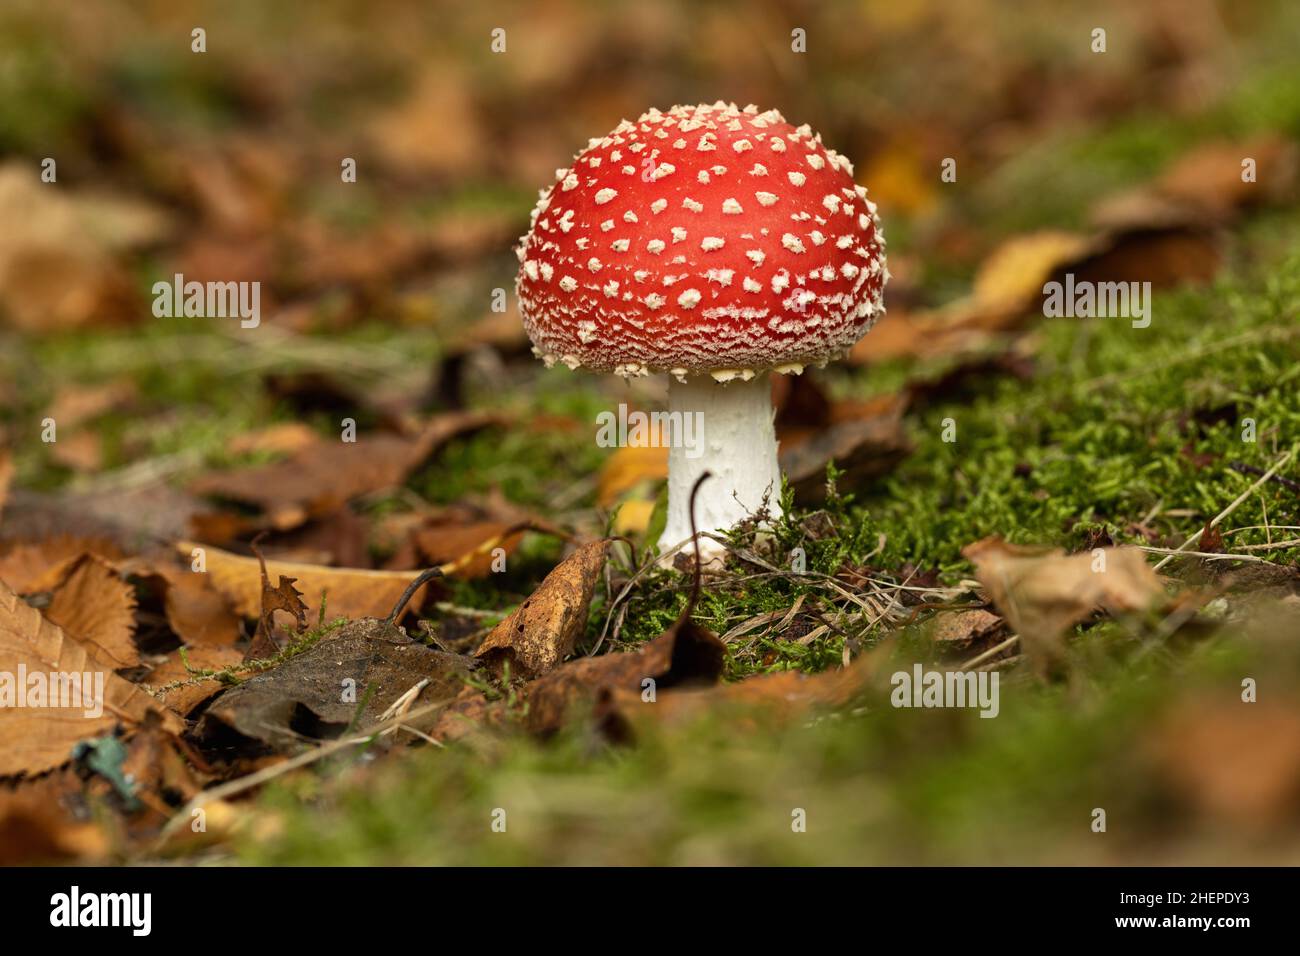 Close up of Amanita Muscaria (Fly agaric mushroom) the iconic toadstool fungi growing on the woodland floor at Bowood House and Gardens, Wiltshire, UK Stock Photo